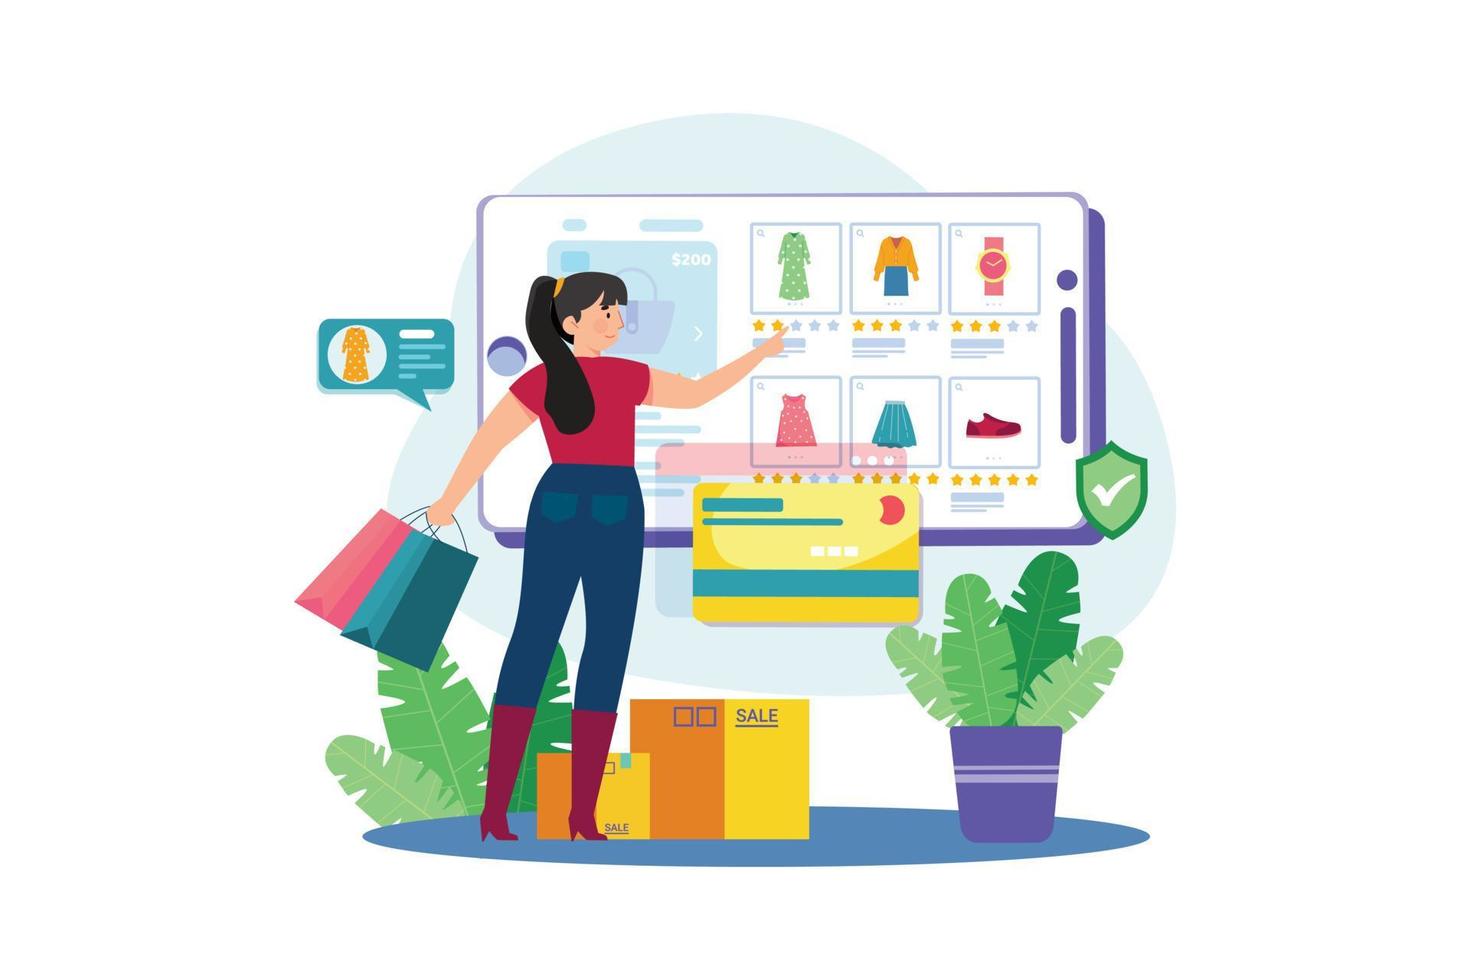 Shopaholic is making purchases in an online store. vector